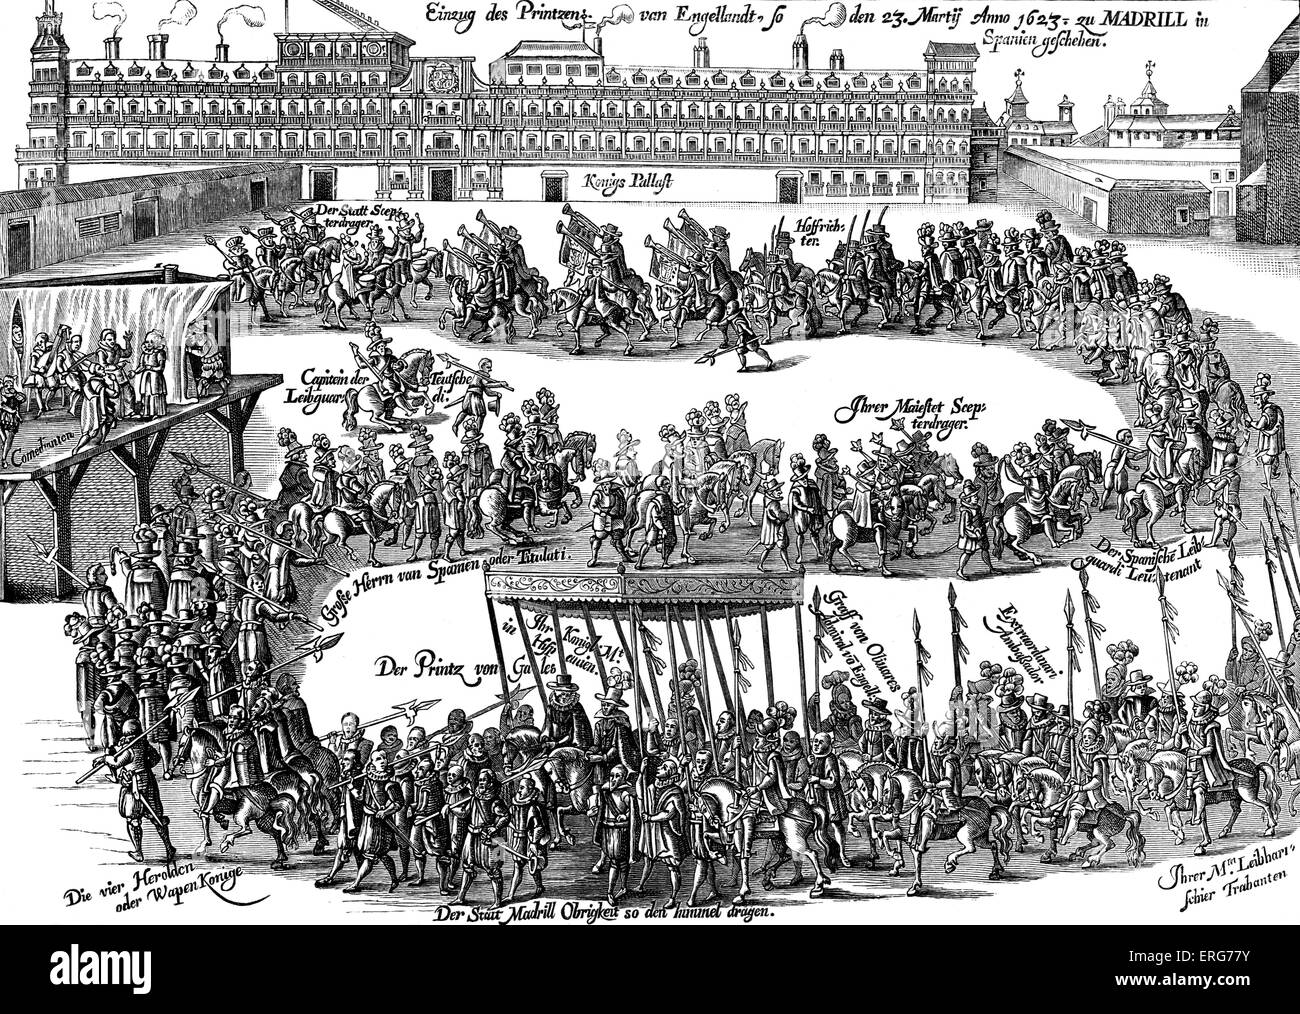 Entry of Prince Charles into Madrid, 1623, taken from a 19th century German print. Charles, Prince of Wales, later Charles I, Stock Photo